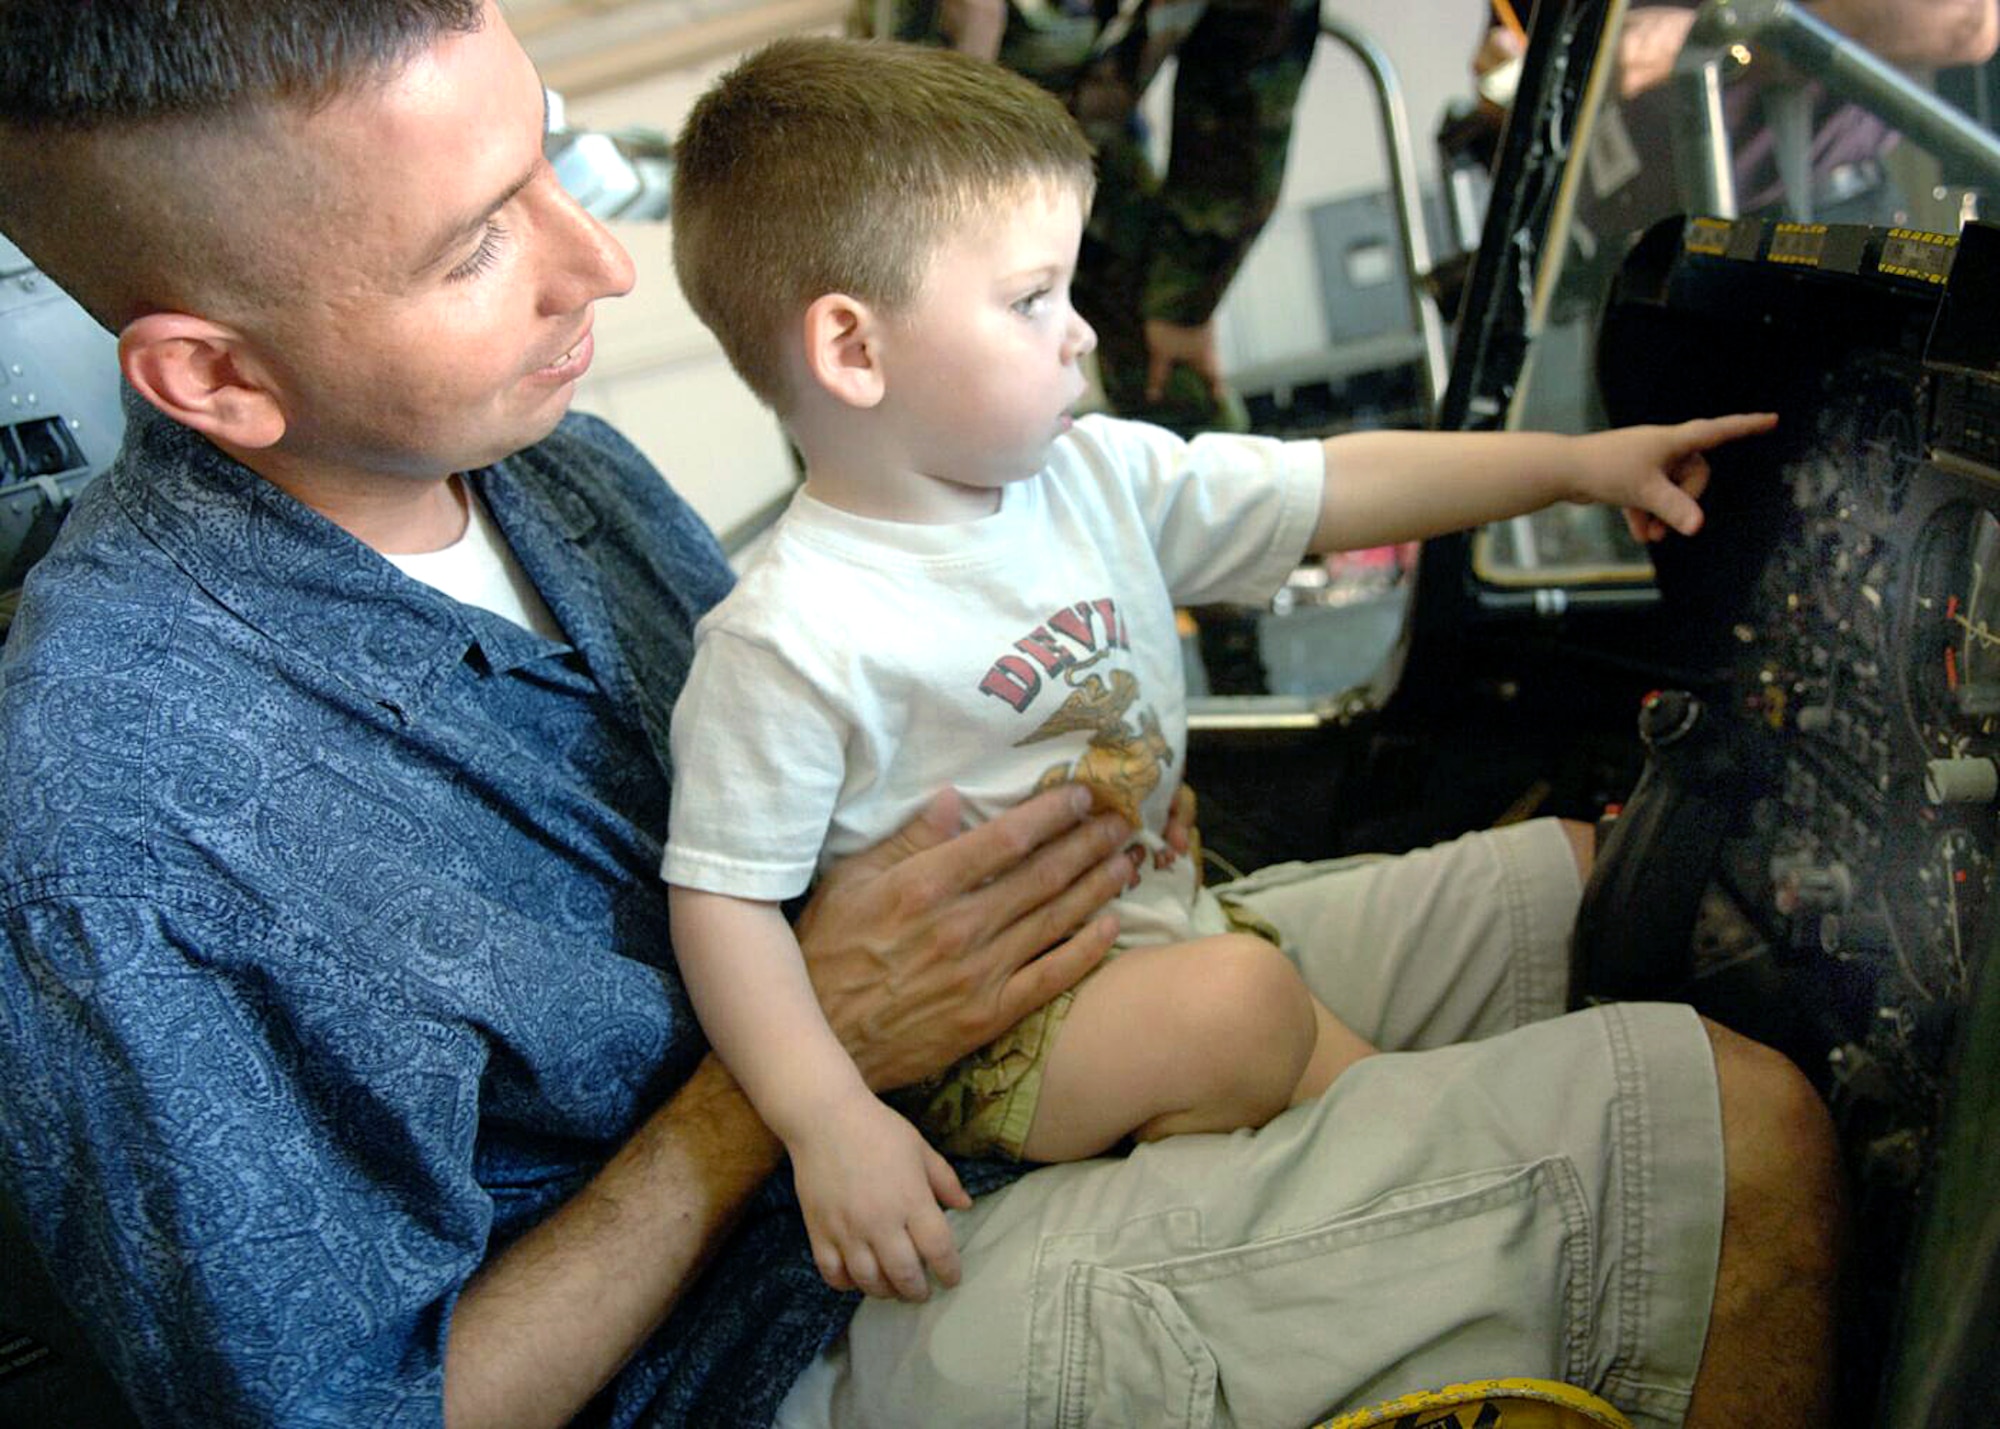 Mark Holguin holds his son, Jacob, 2, as they sit in the cockpit of an A-10 Thunderbolt II during a tour of Davis-Monthan Air Force Base, Ariz., on July 17. The Make-A-Wish Foundation teamed with Davis-Monthan to offer a tour of the base for Jacob and other Make-A-Wish children as well as their families. The tour consisted of demonstrations by an explosive ordnance disposal robot, base fire department and a weapons load crew for an A-10. (U.S. Air Force photo/Senior Airman Christina D. Ponte)